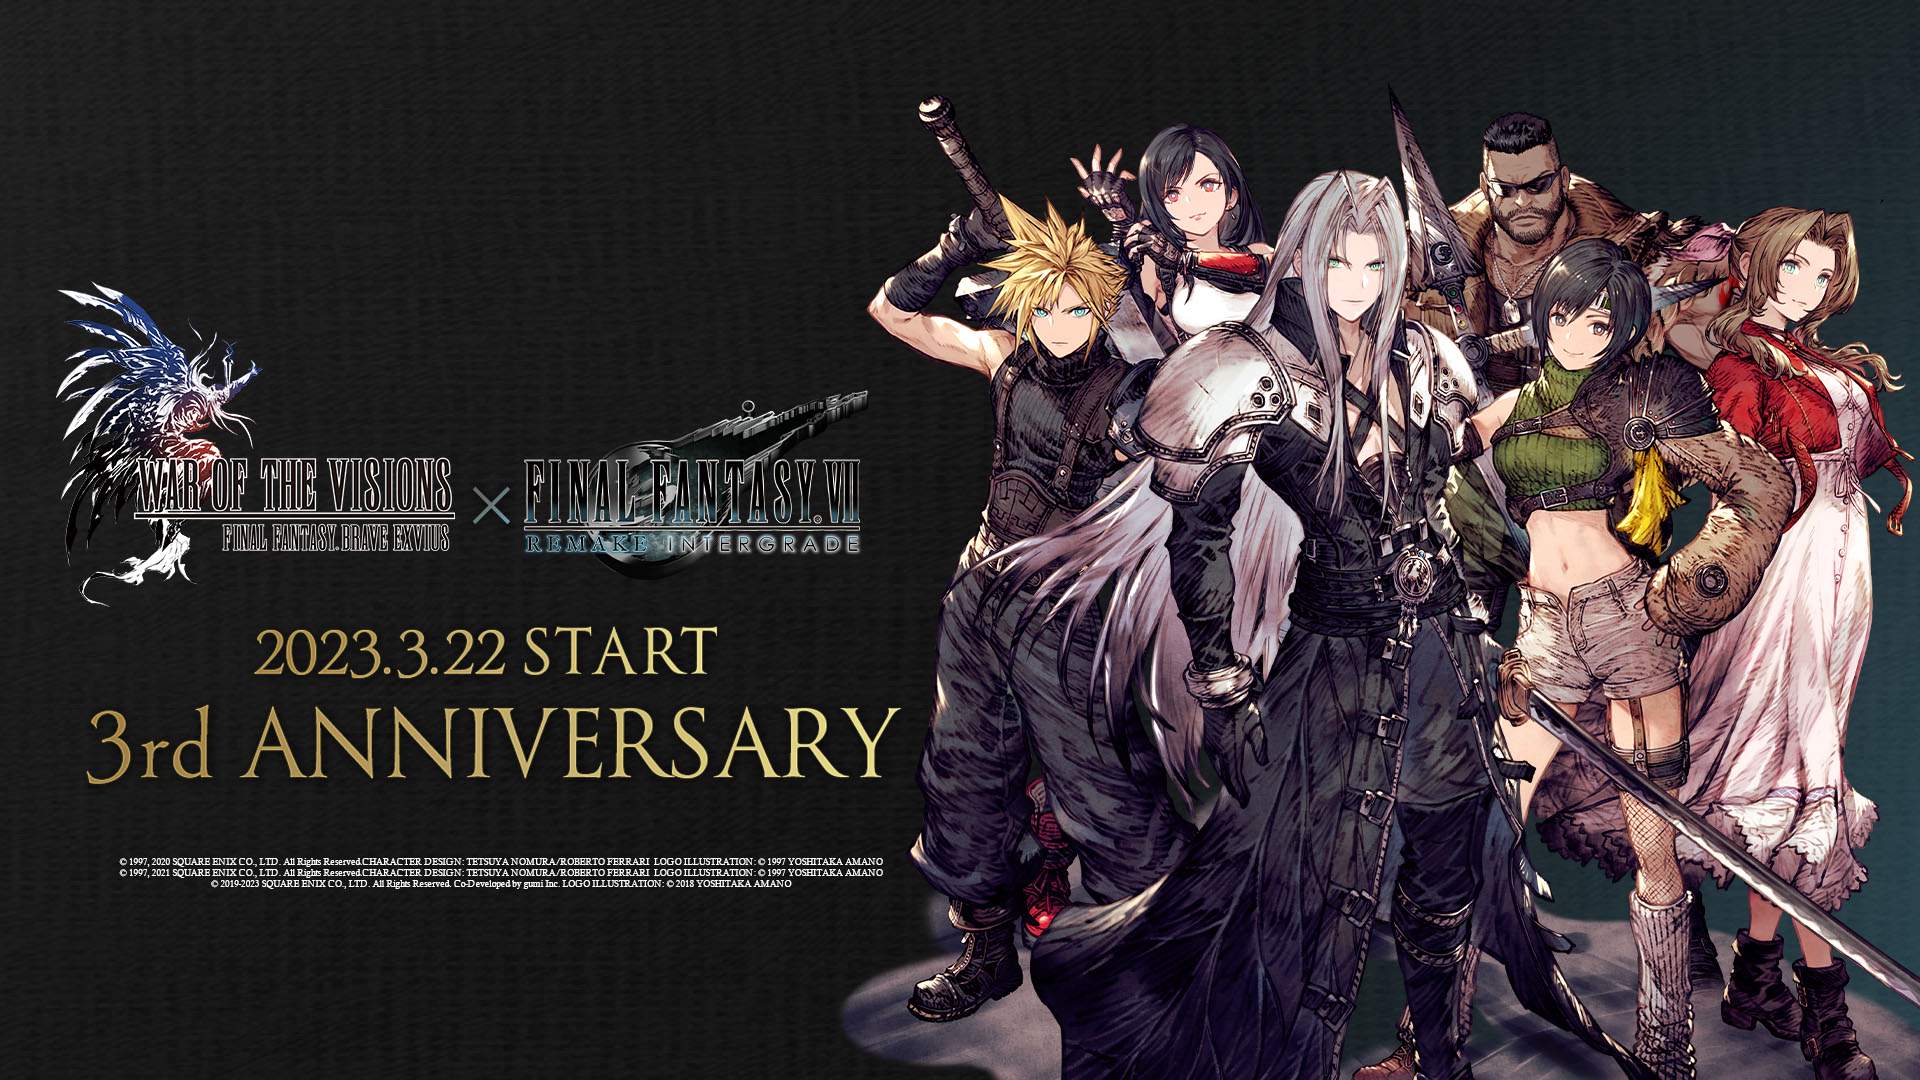 Characters from FF7 in WOTV FFBE line up to celebrate the 3rd anniversary